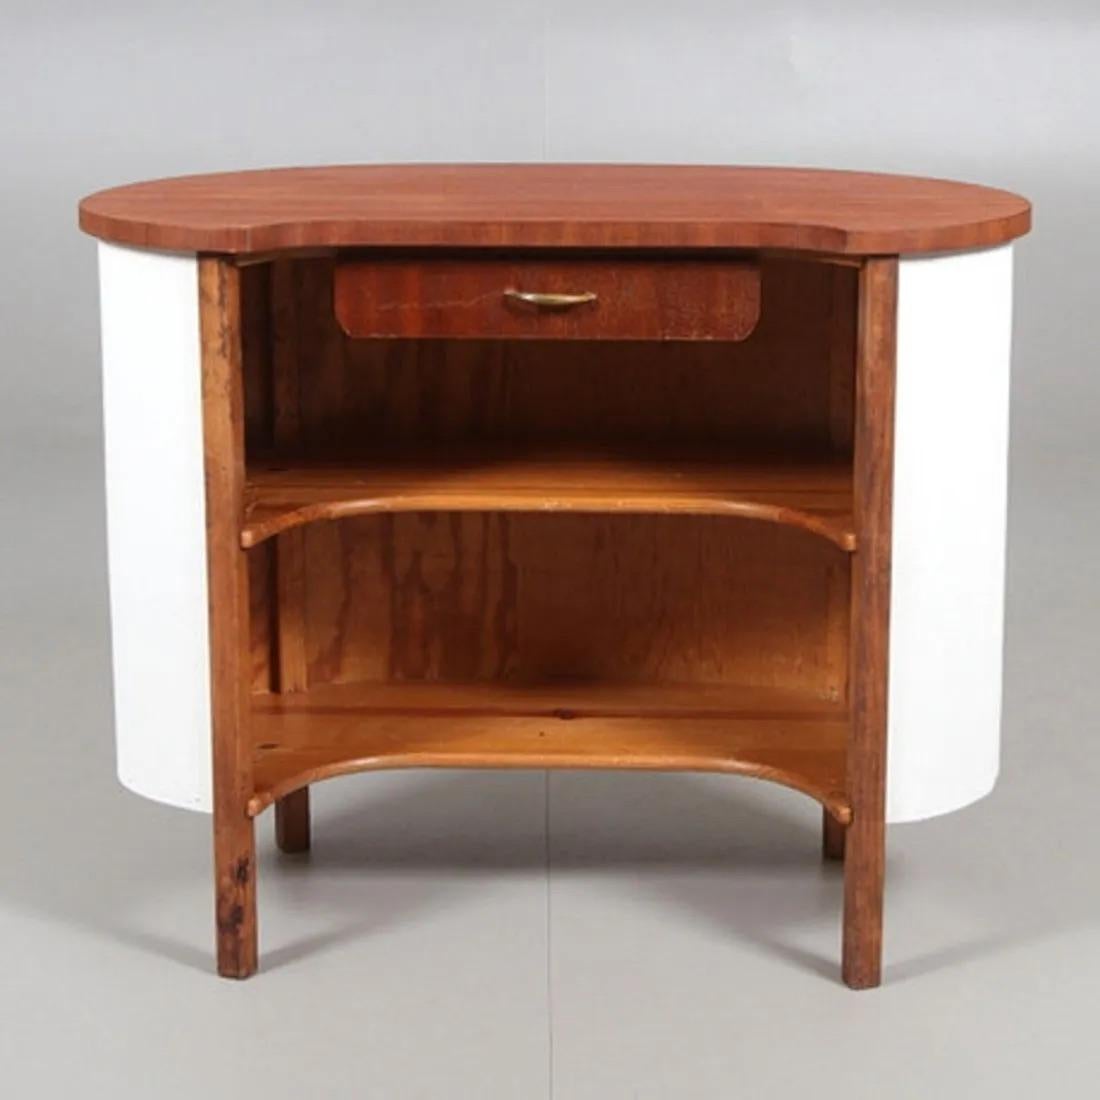 BUSINESS TABLE, teak with drawer and shelf

Dimensions:  
Width---34